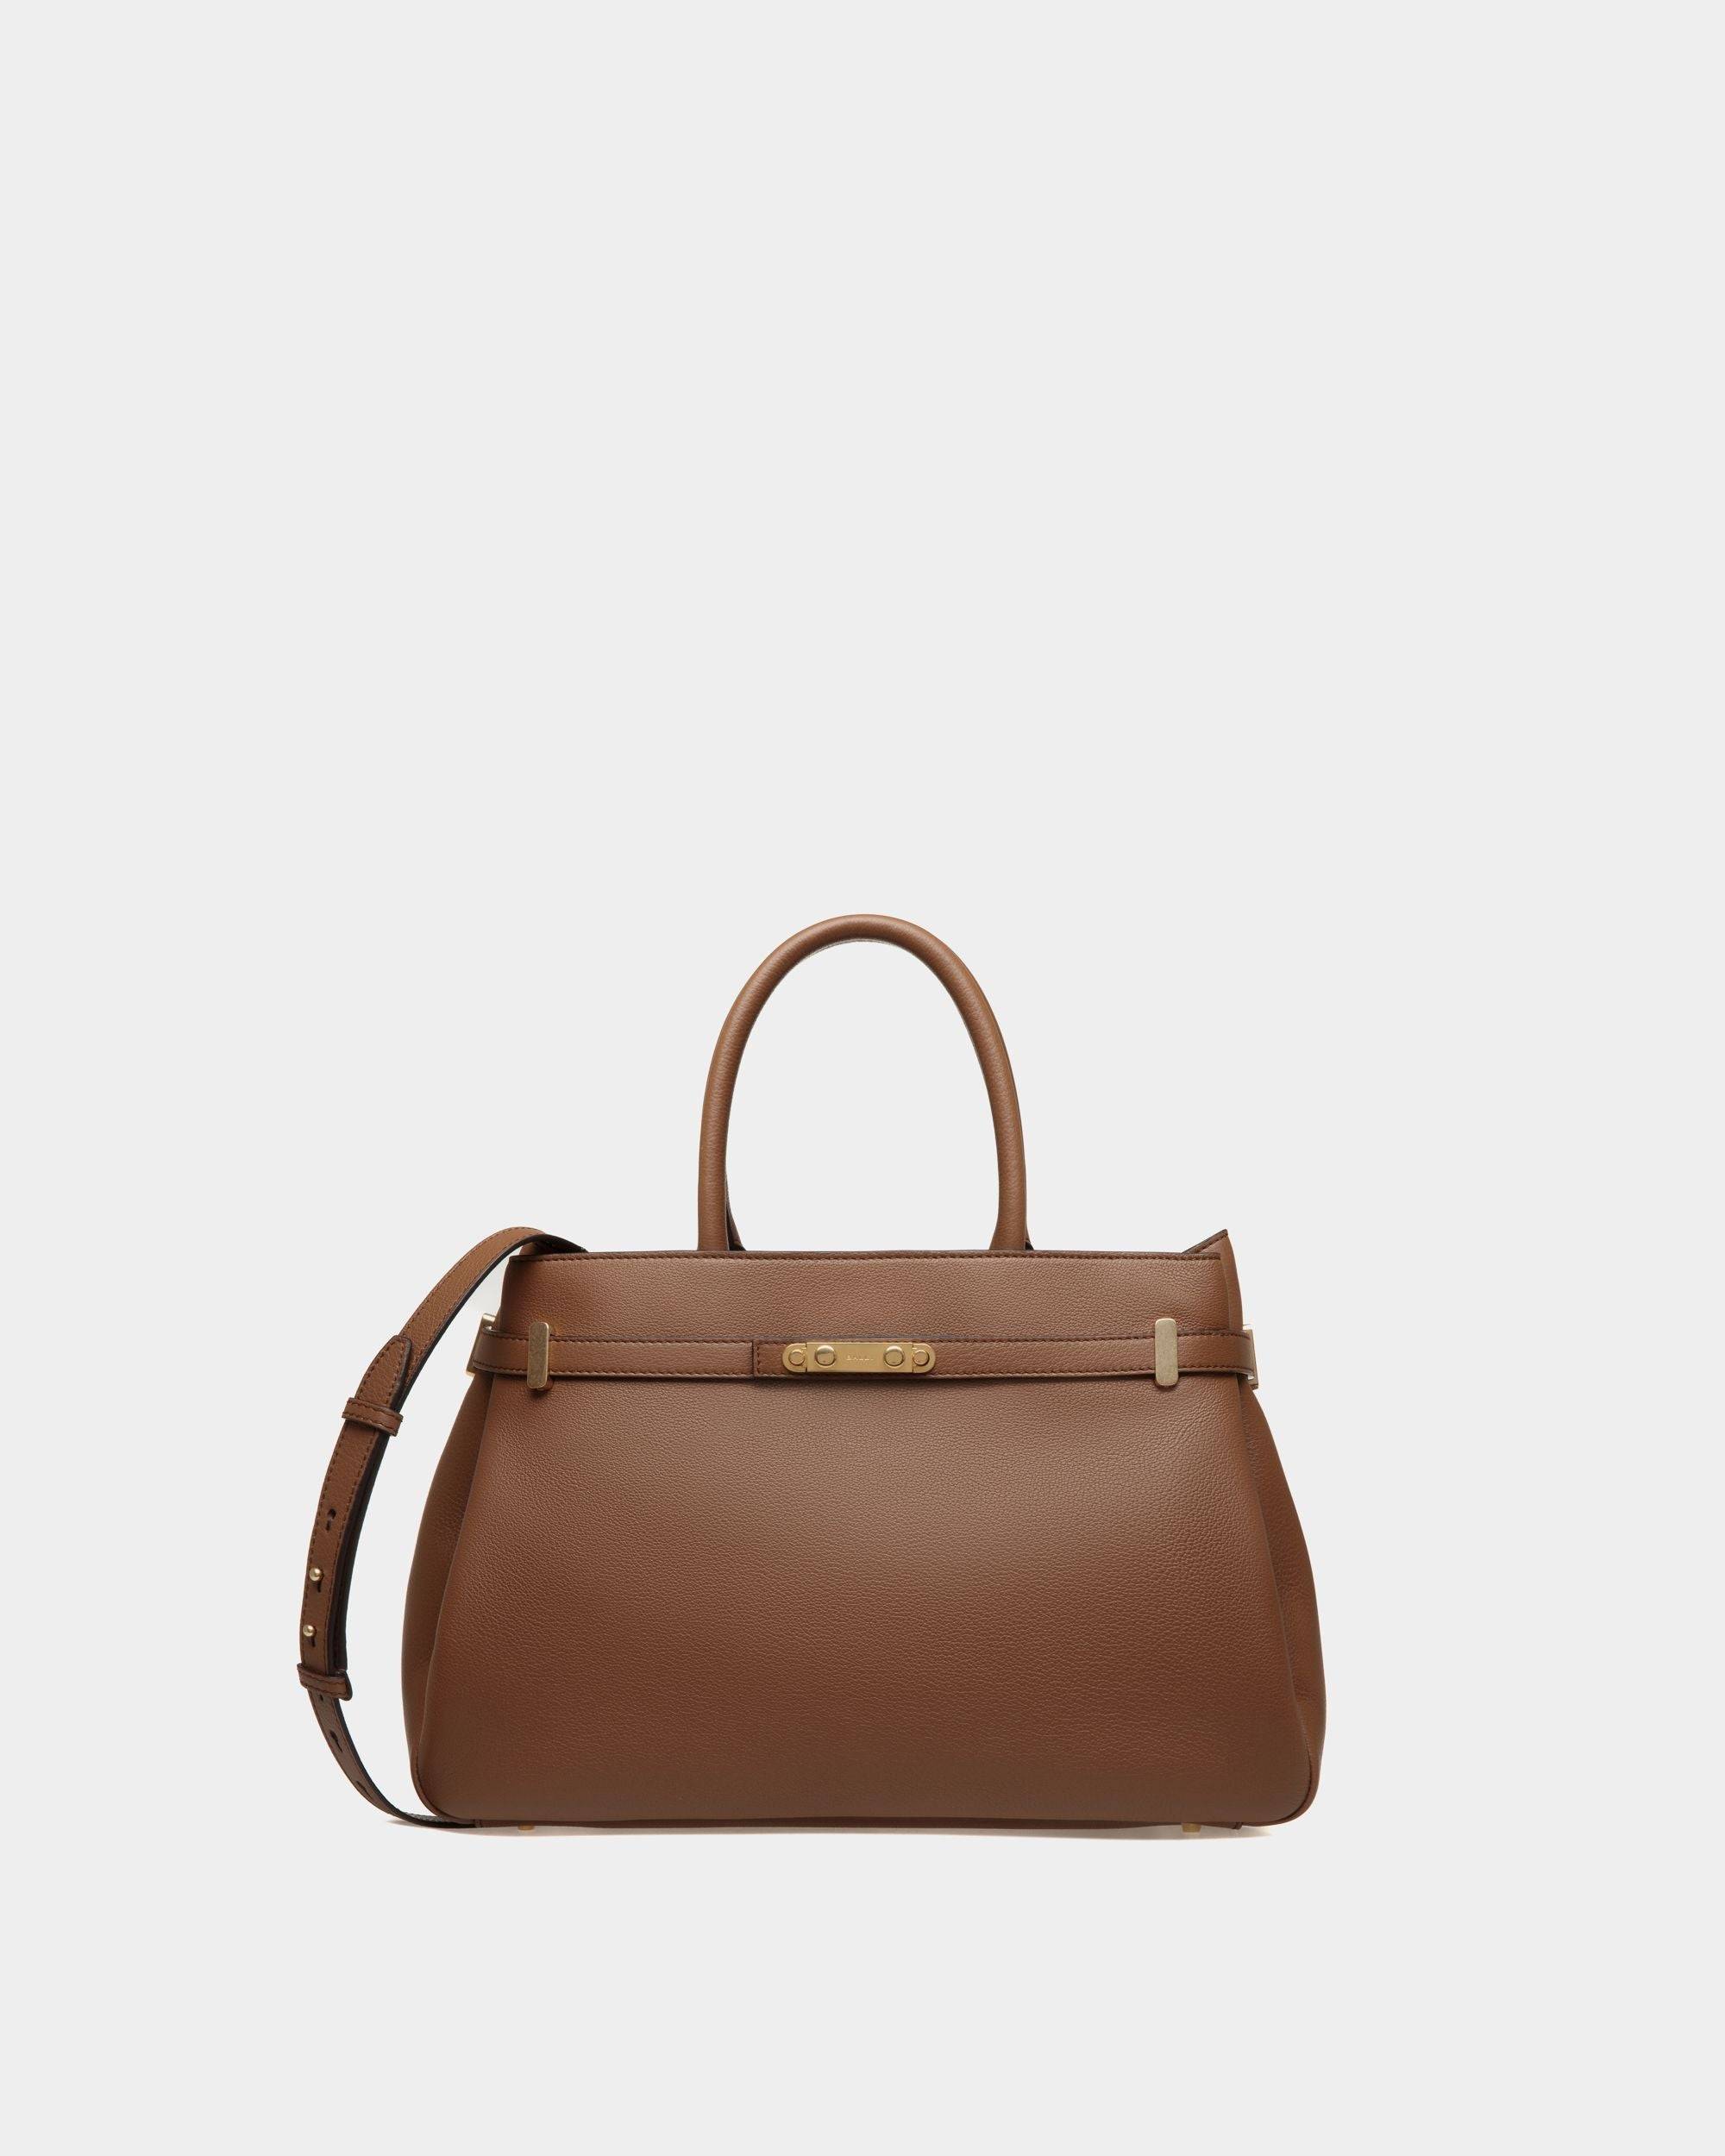 Women's Designer Bags: Shoulder Bags, Clutches & Totes | Bally